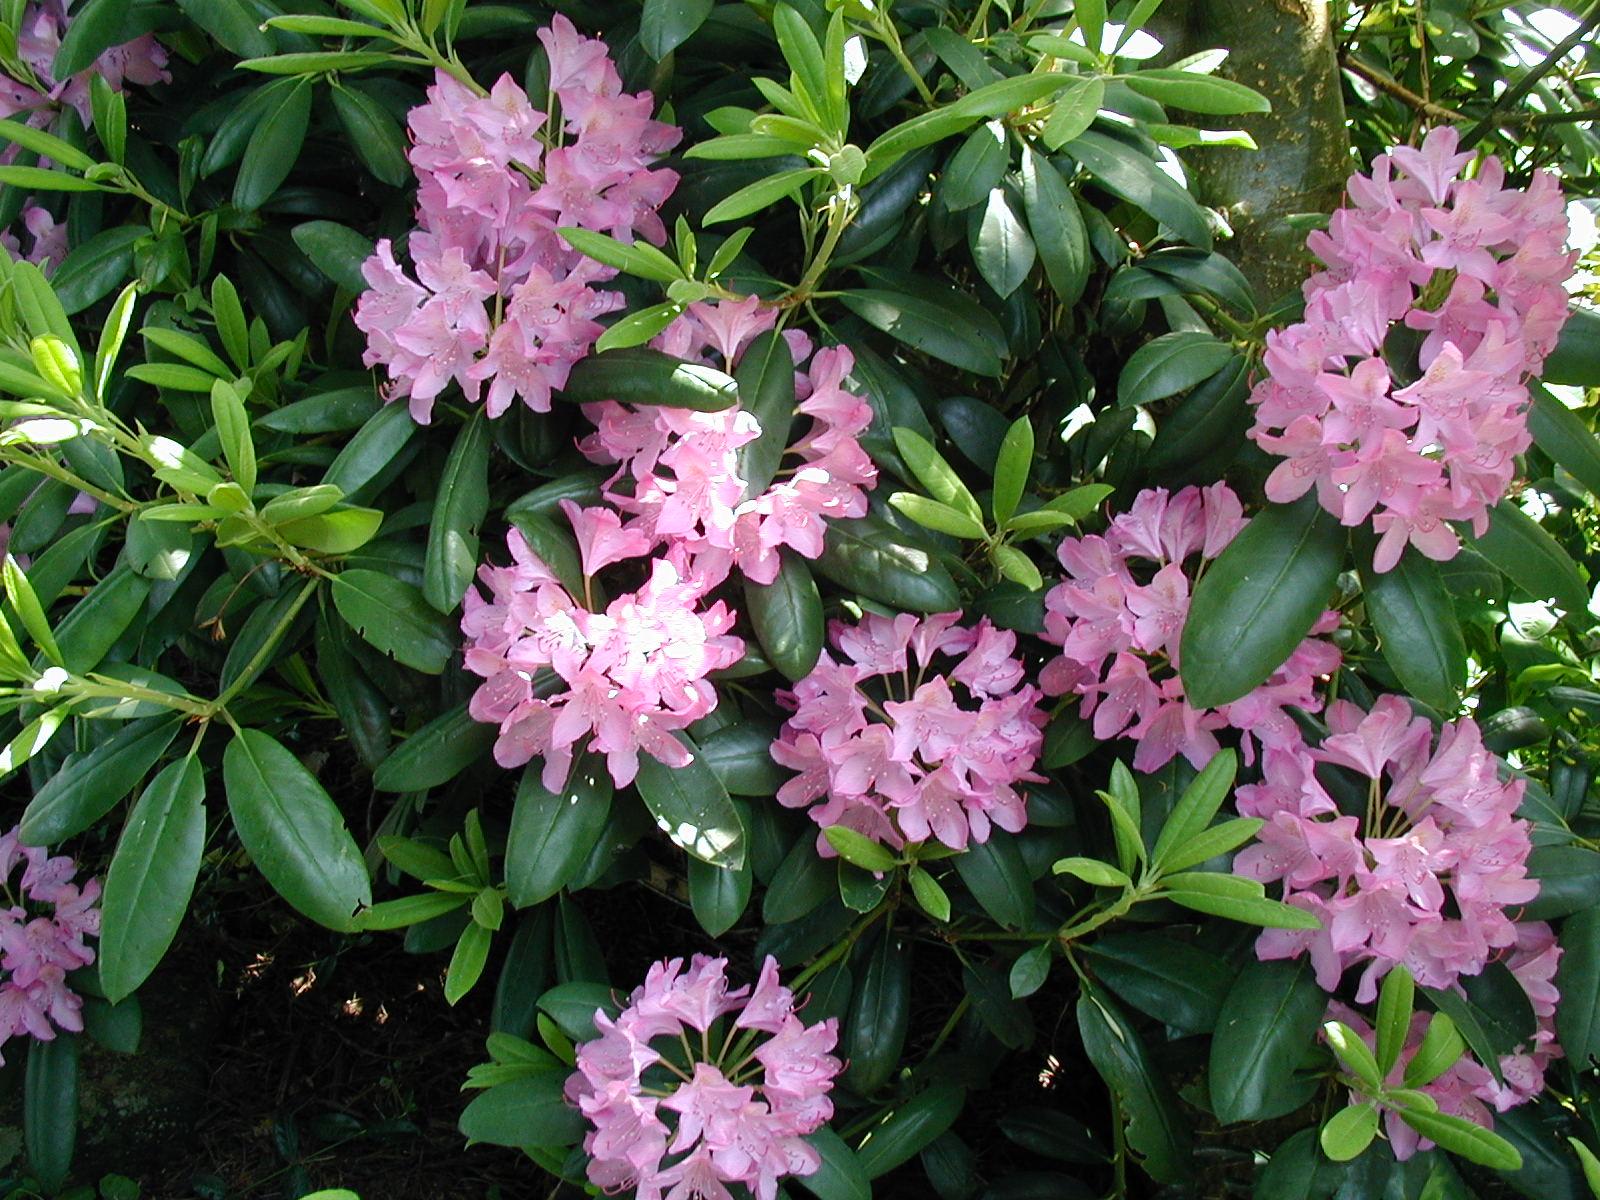 Details about   10 Azalea plant cuttings Tsutsuji Pentanthe Rhododendron plants cuttings seeds